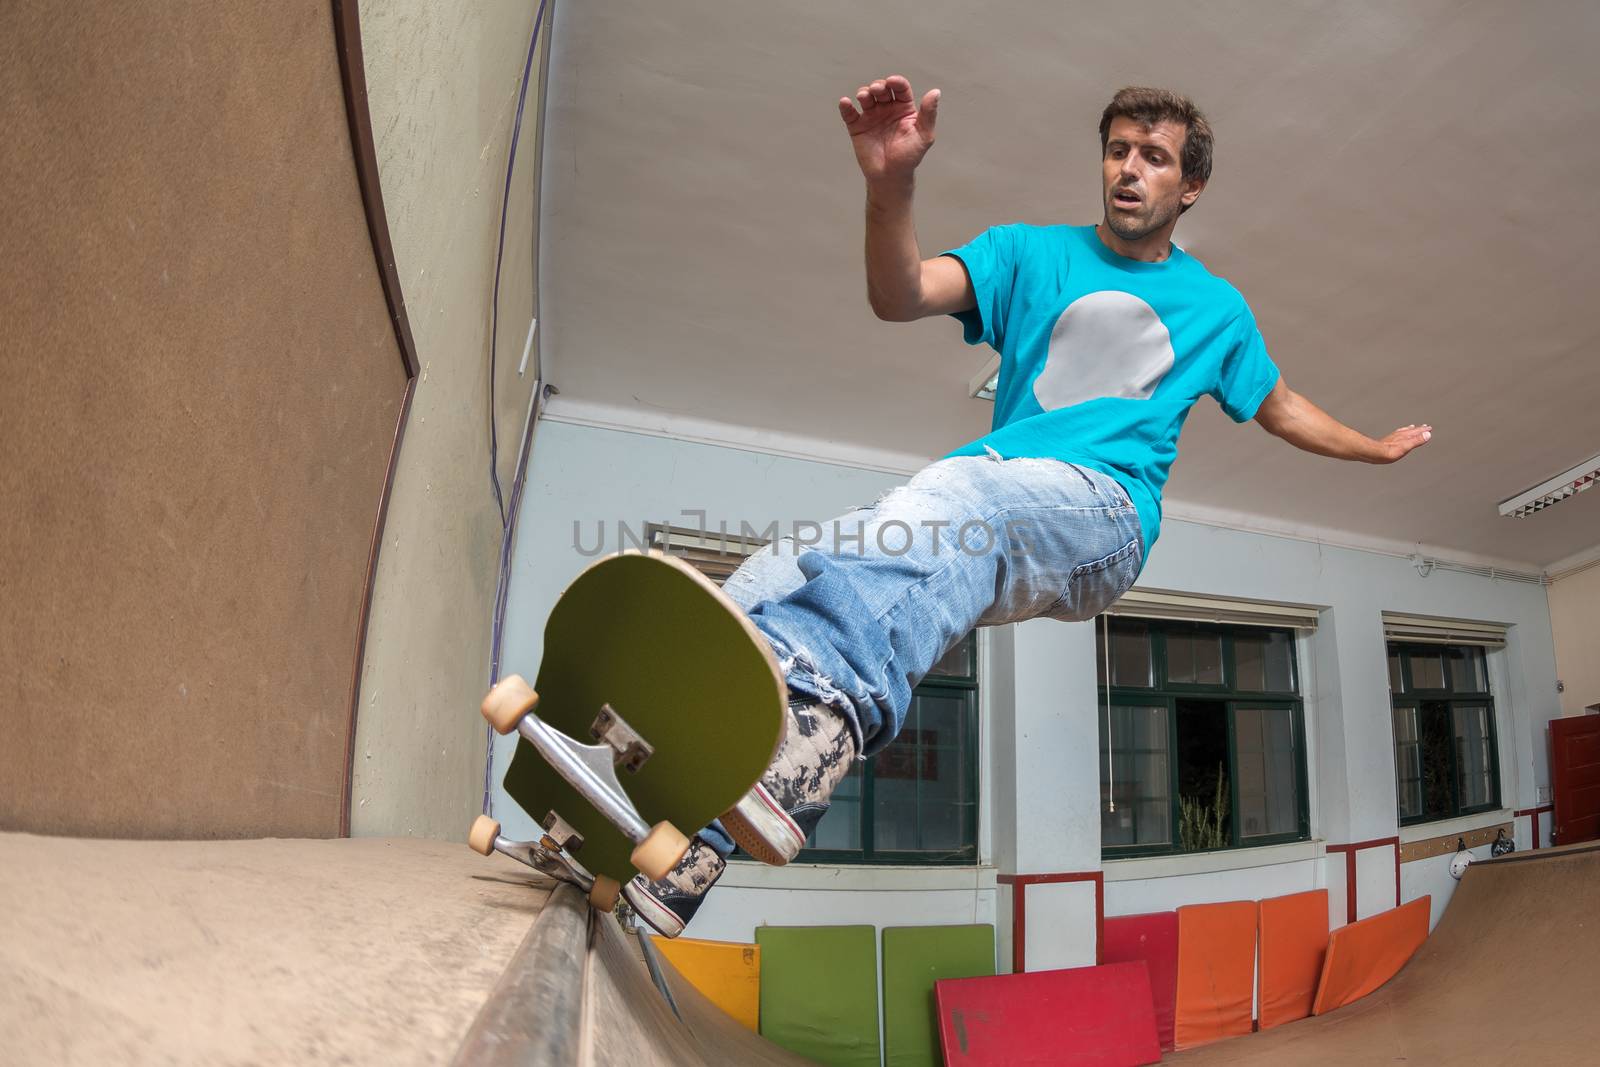 Skateboarder performing a trick by homydesign